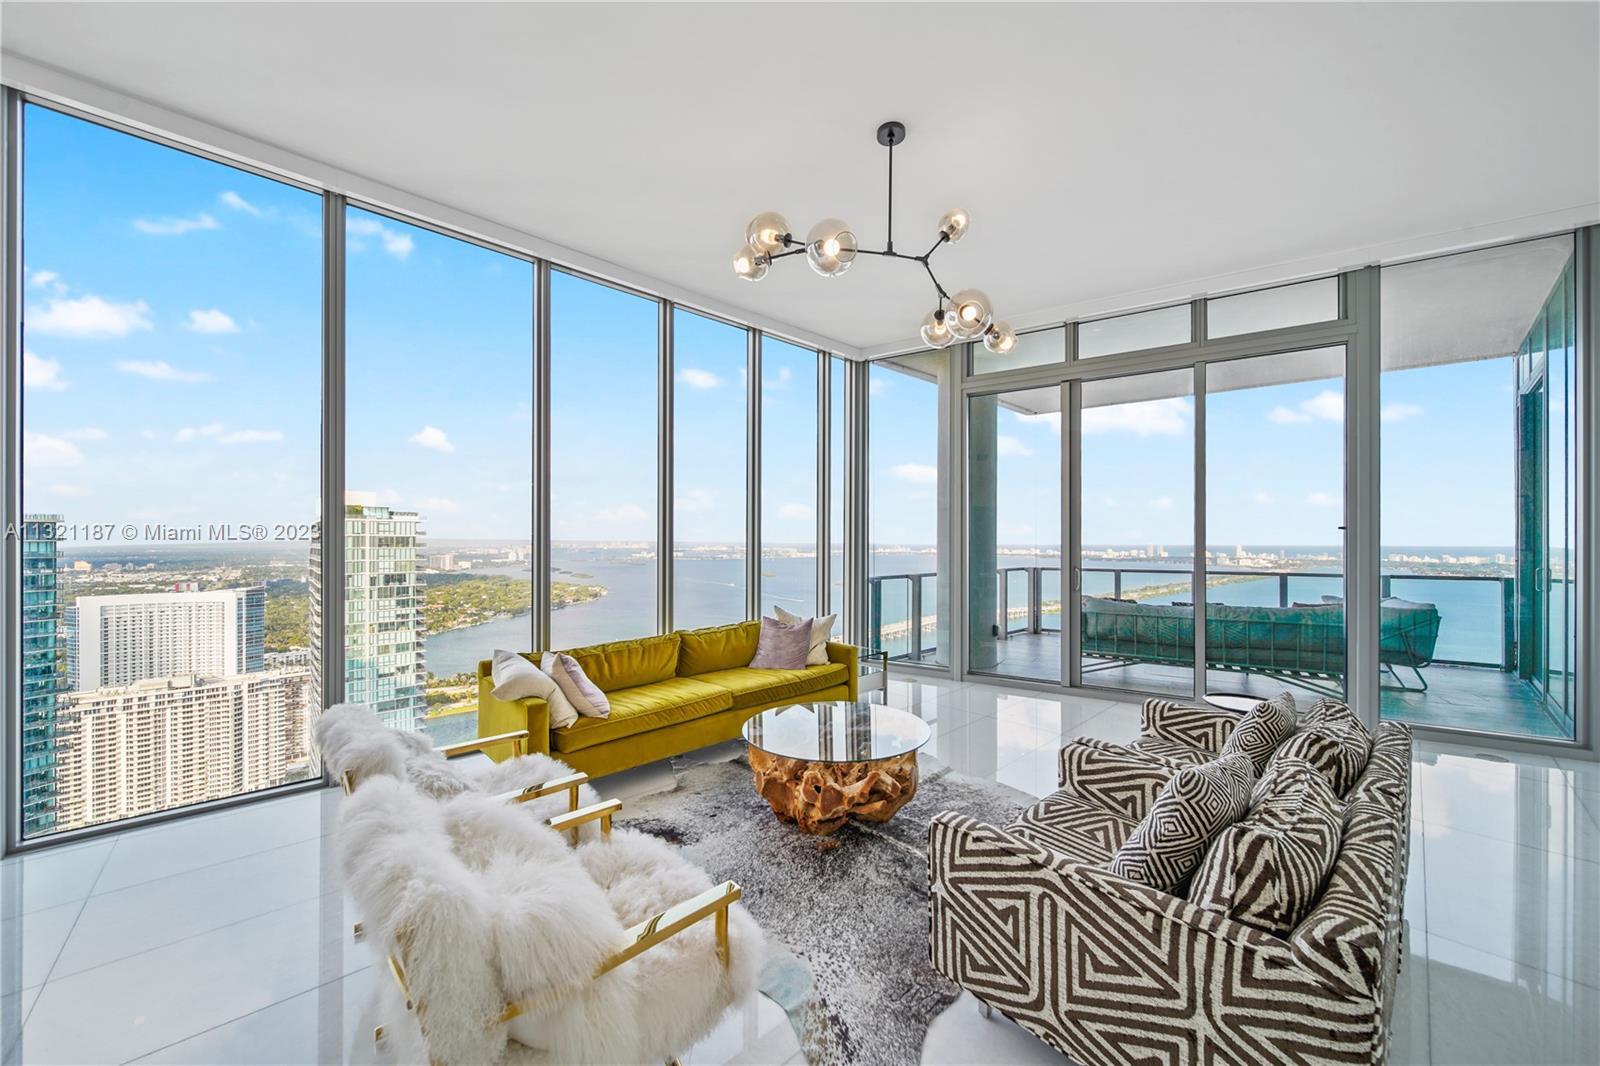 Spectacular NE corner Penthouse 3BD/3.5BA plus oversized family room with direct bay and ocean views